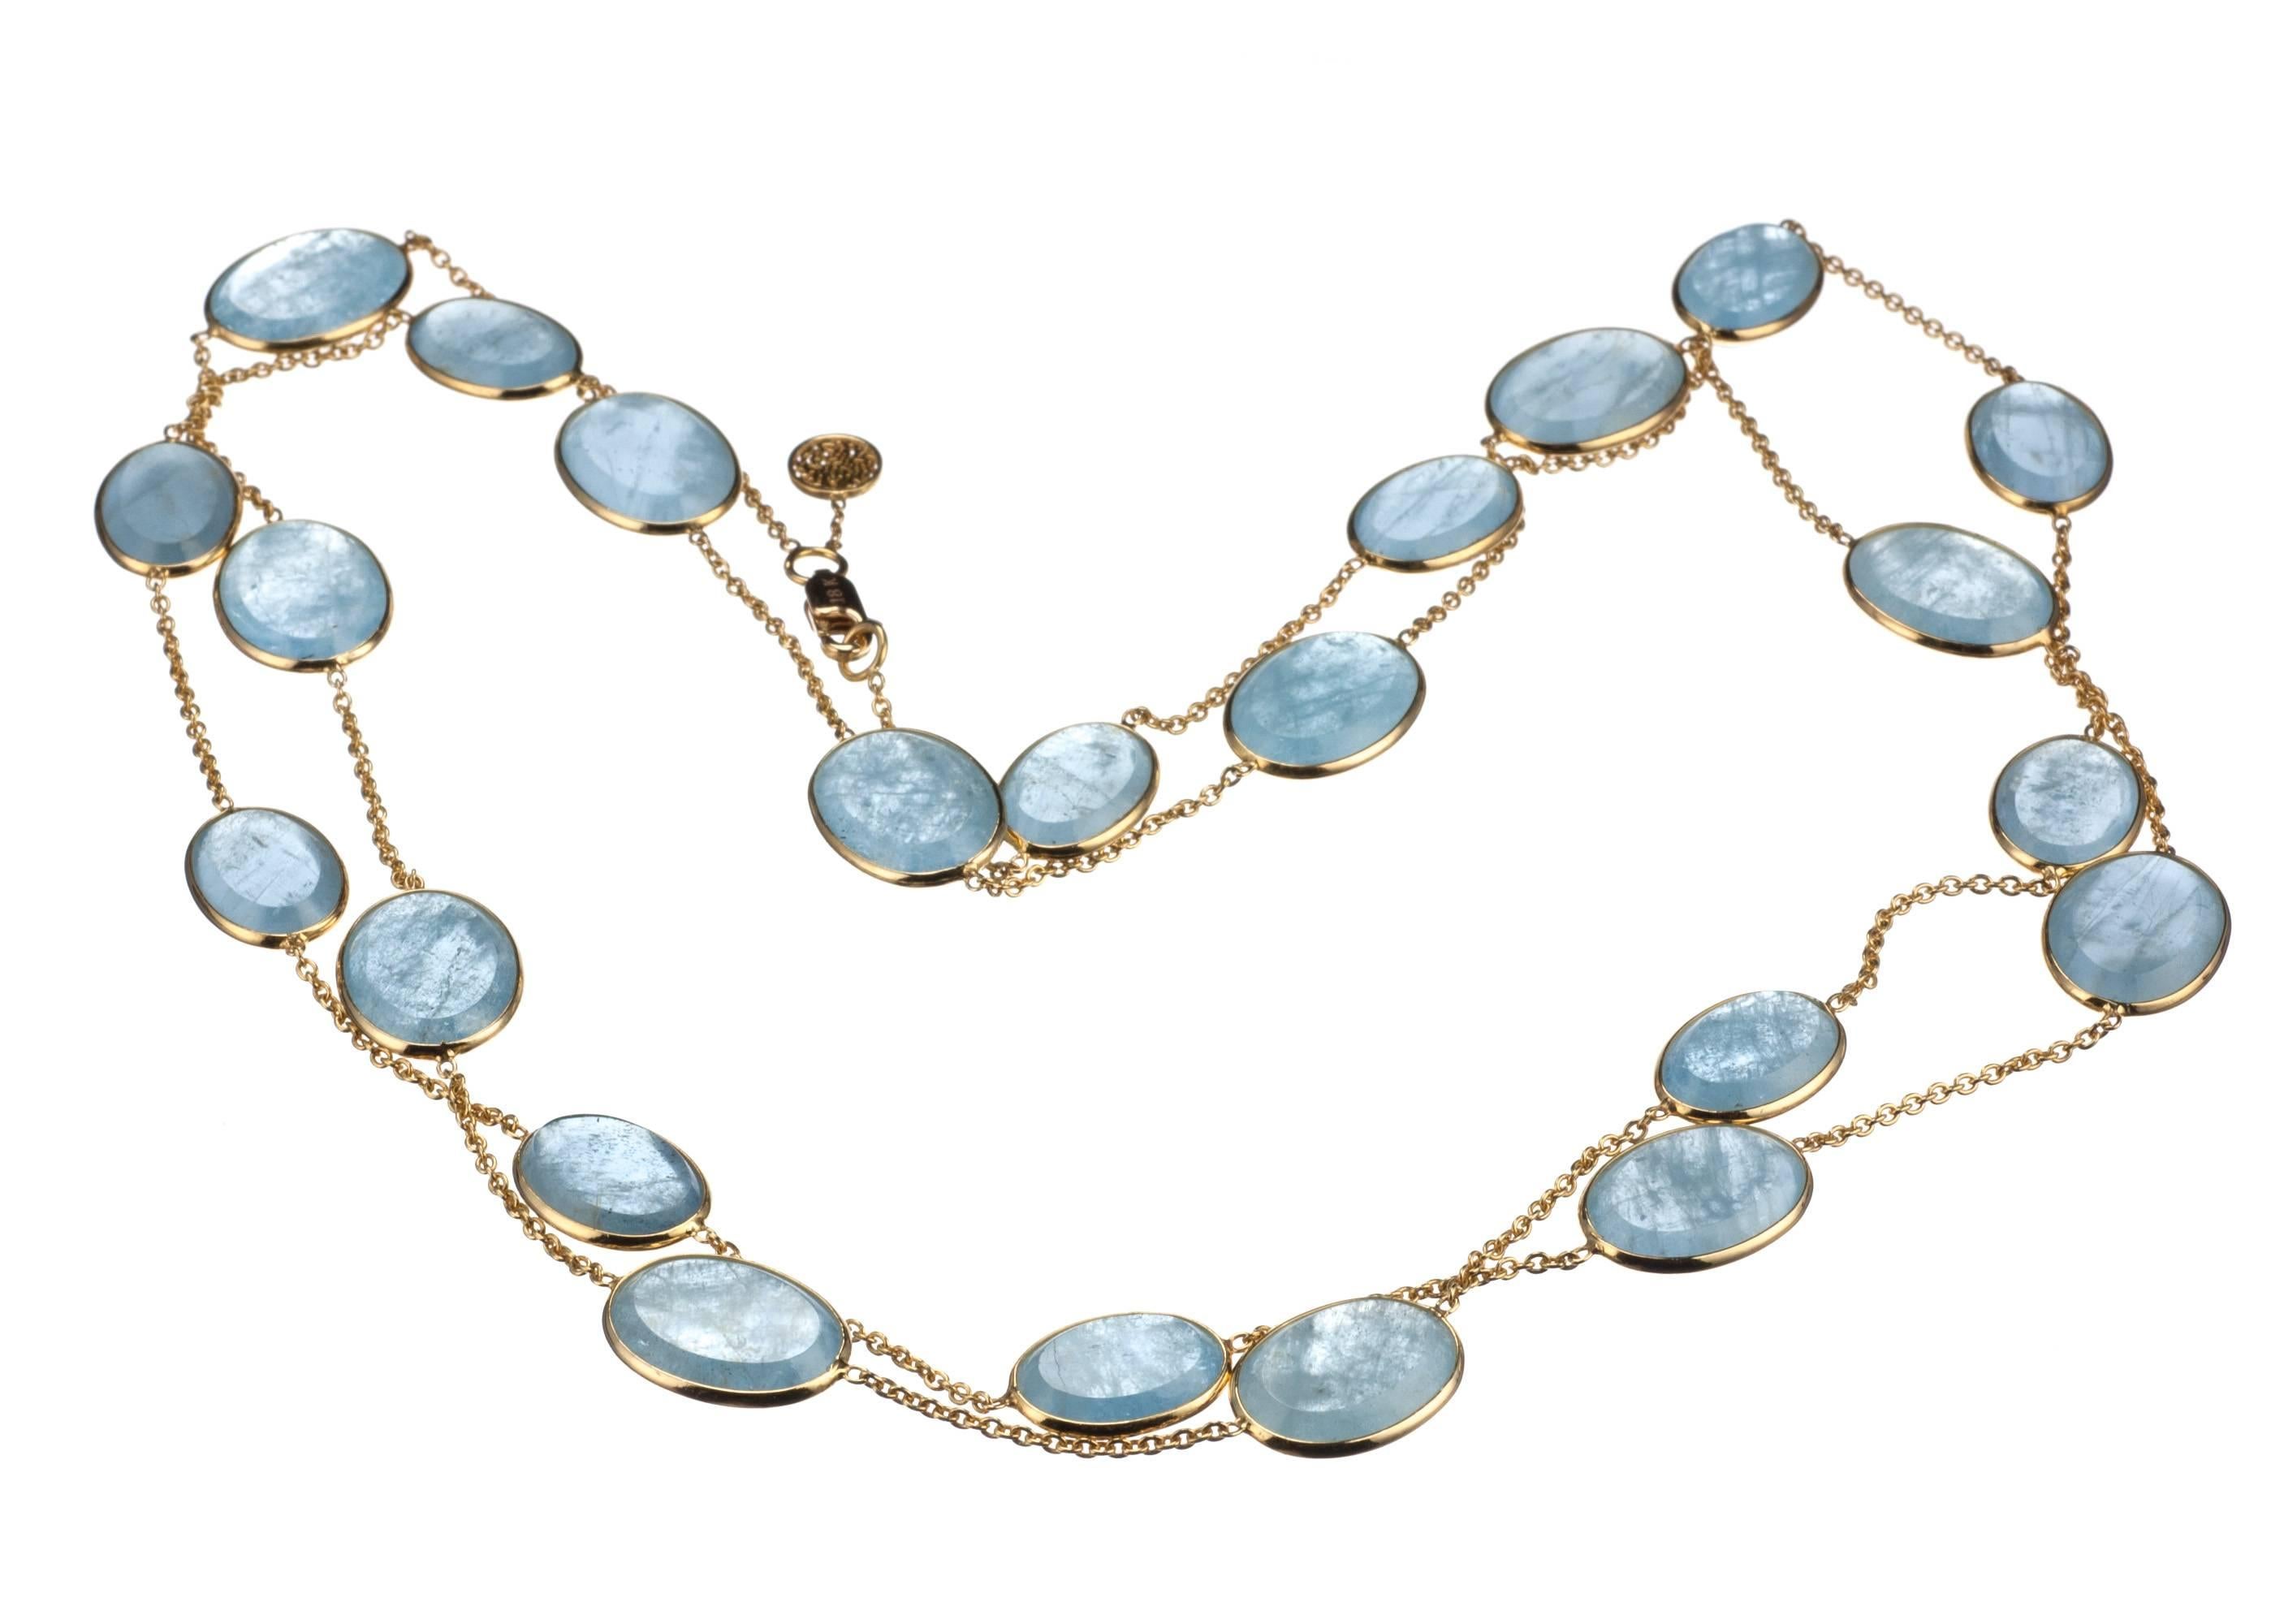 The warmth of 18-karat yellow gold plays with the icy blue of aquamarine in this station necklace. 23 oval slices of aquamarine, 135.38ctw., are bezel set with approx. 1.5” between stations. At approx. 39” in length, this necklace can be worn long